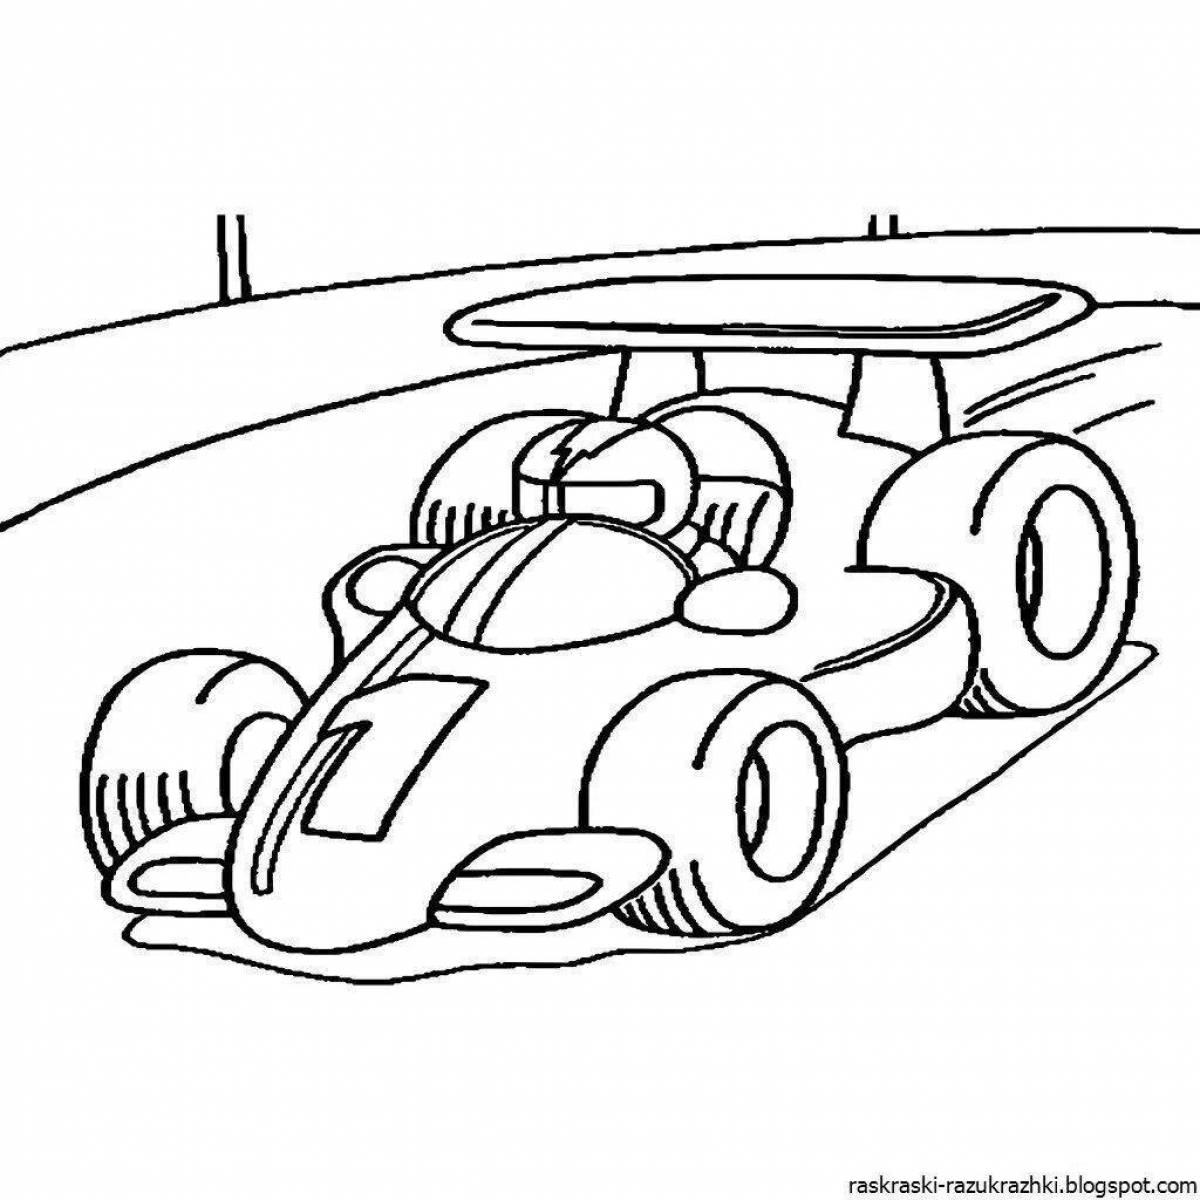 Coloring pages with cool racing cars for the little ones